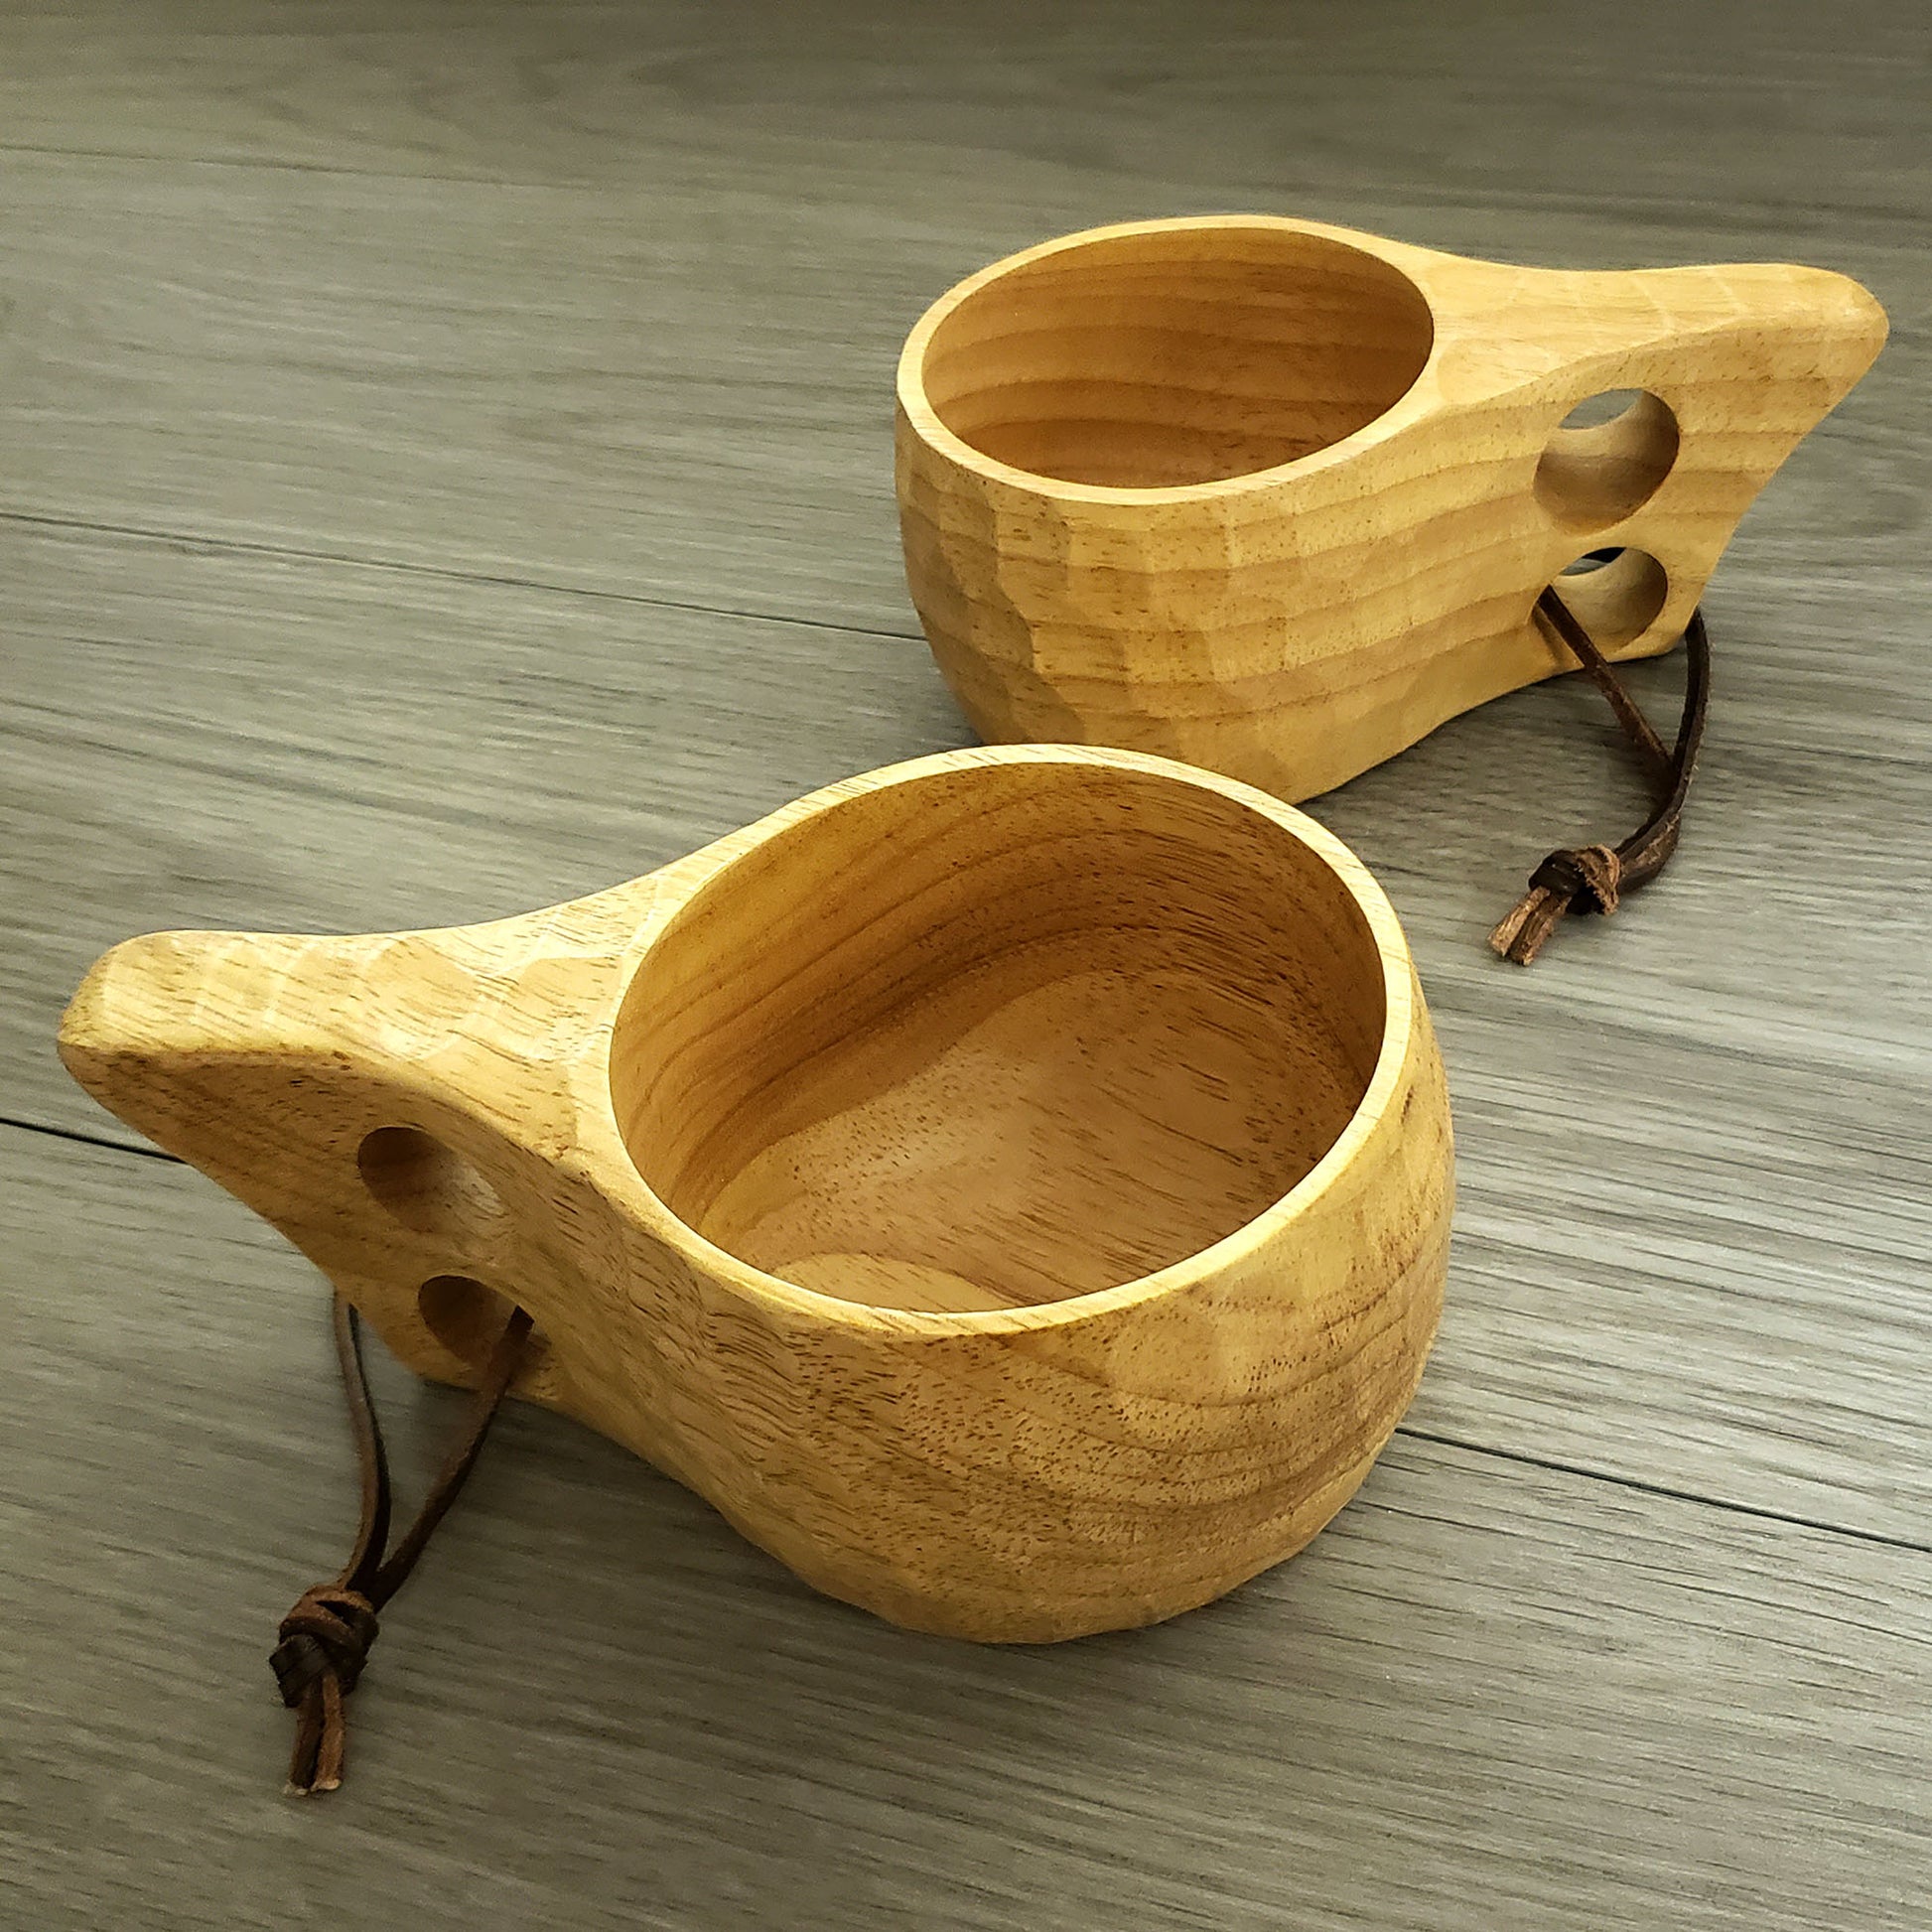 Double-hole Handle Hand-carved Traditional Scandinavian Kuksa Cup